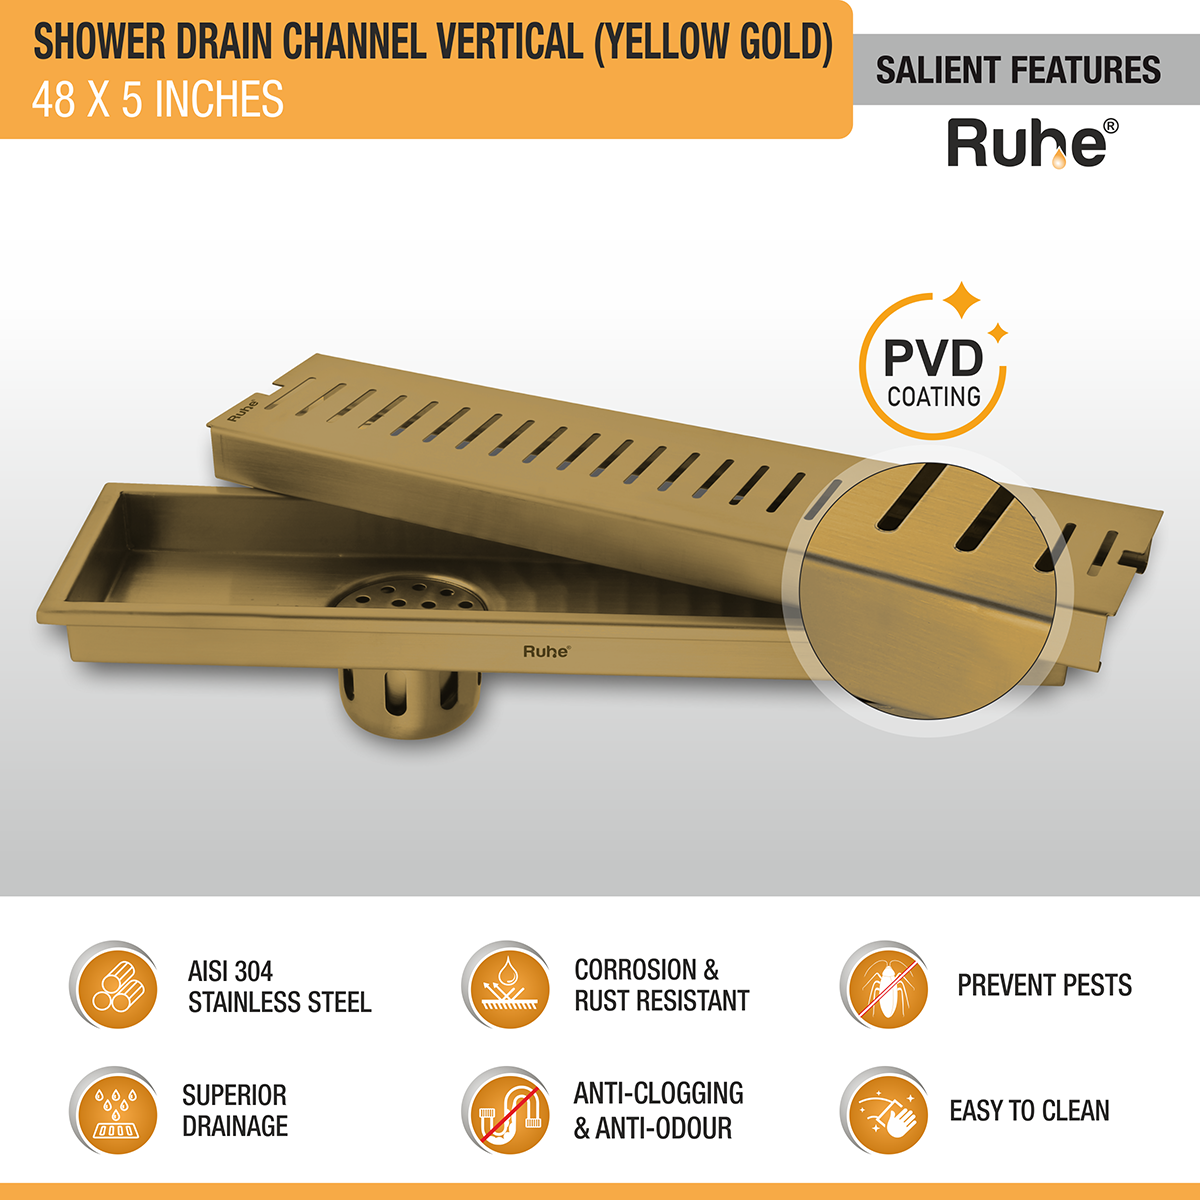 Vertical Shower Drain Channel (48 x 5 Inches) YELLOW GOLD features